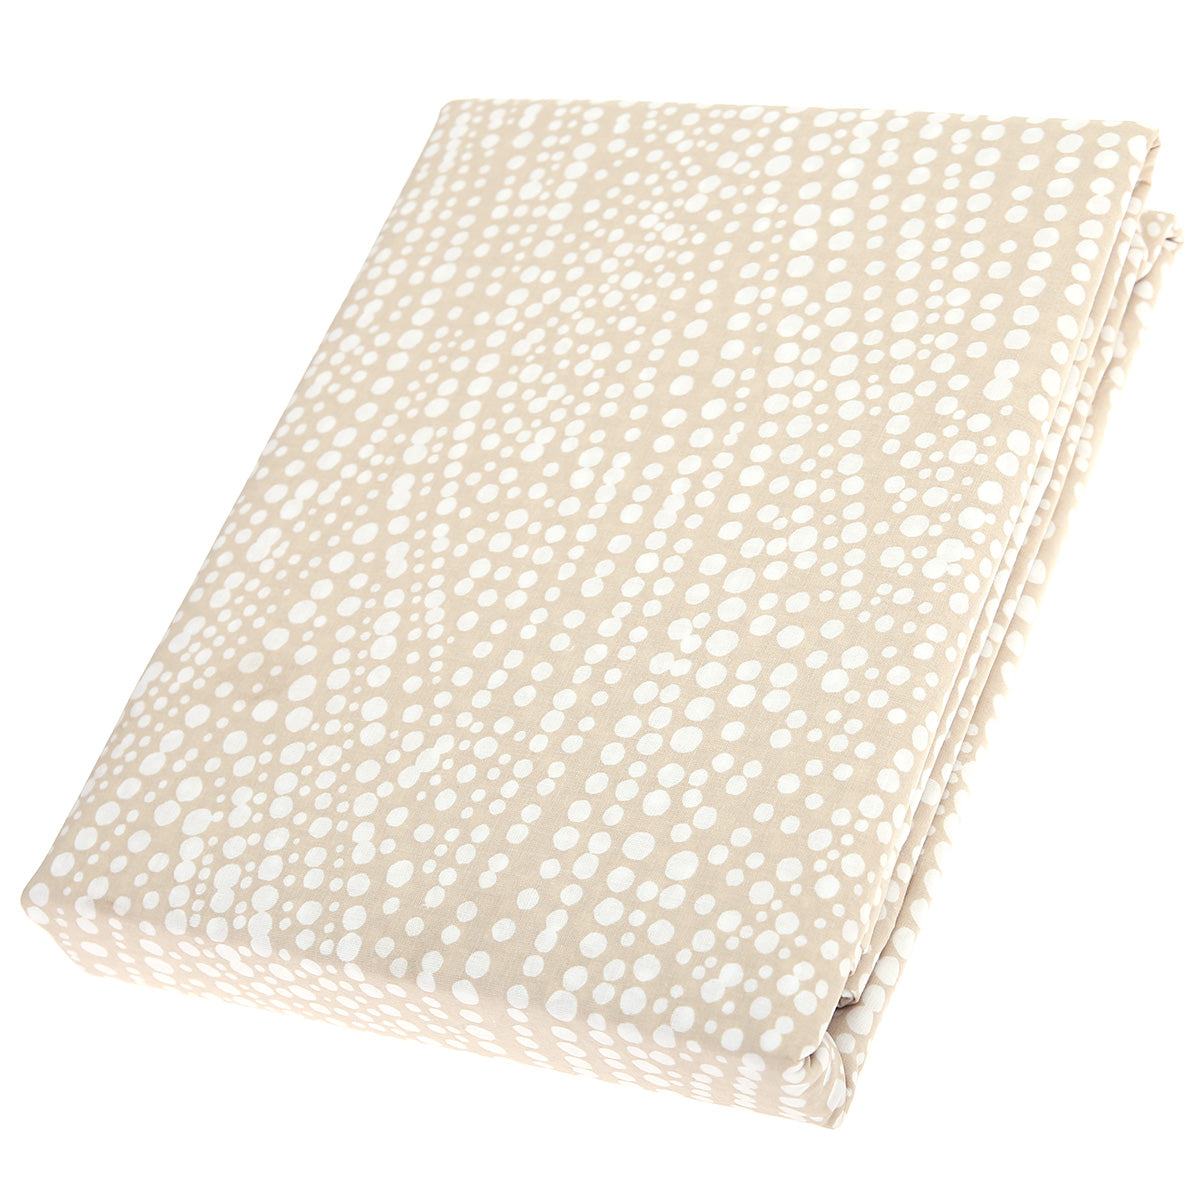 Off white Polka dot Double Bed Sheet 96x102"